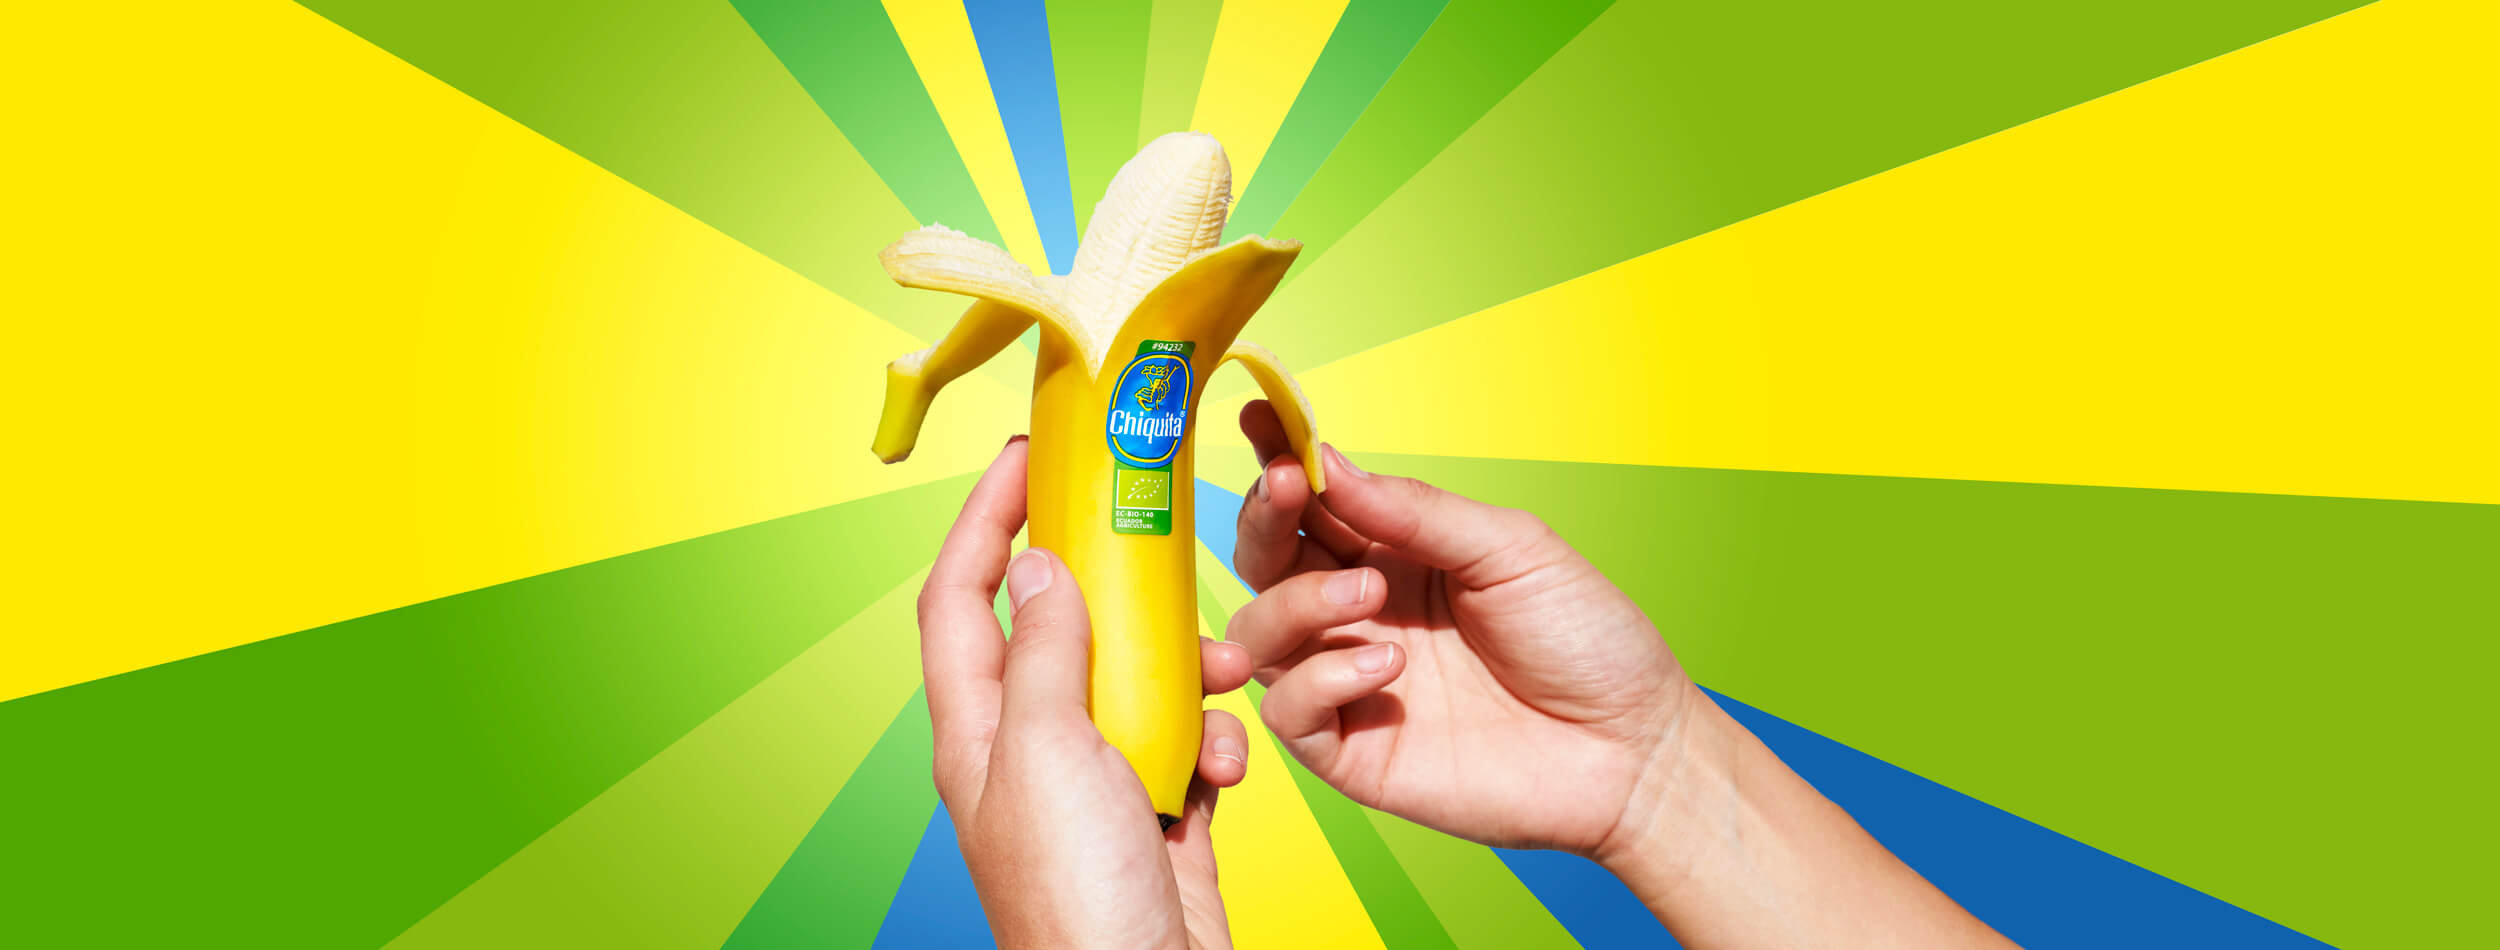 Be naturally awesome with Chiquita’s organic bananas - 1